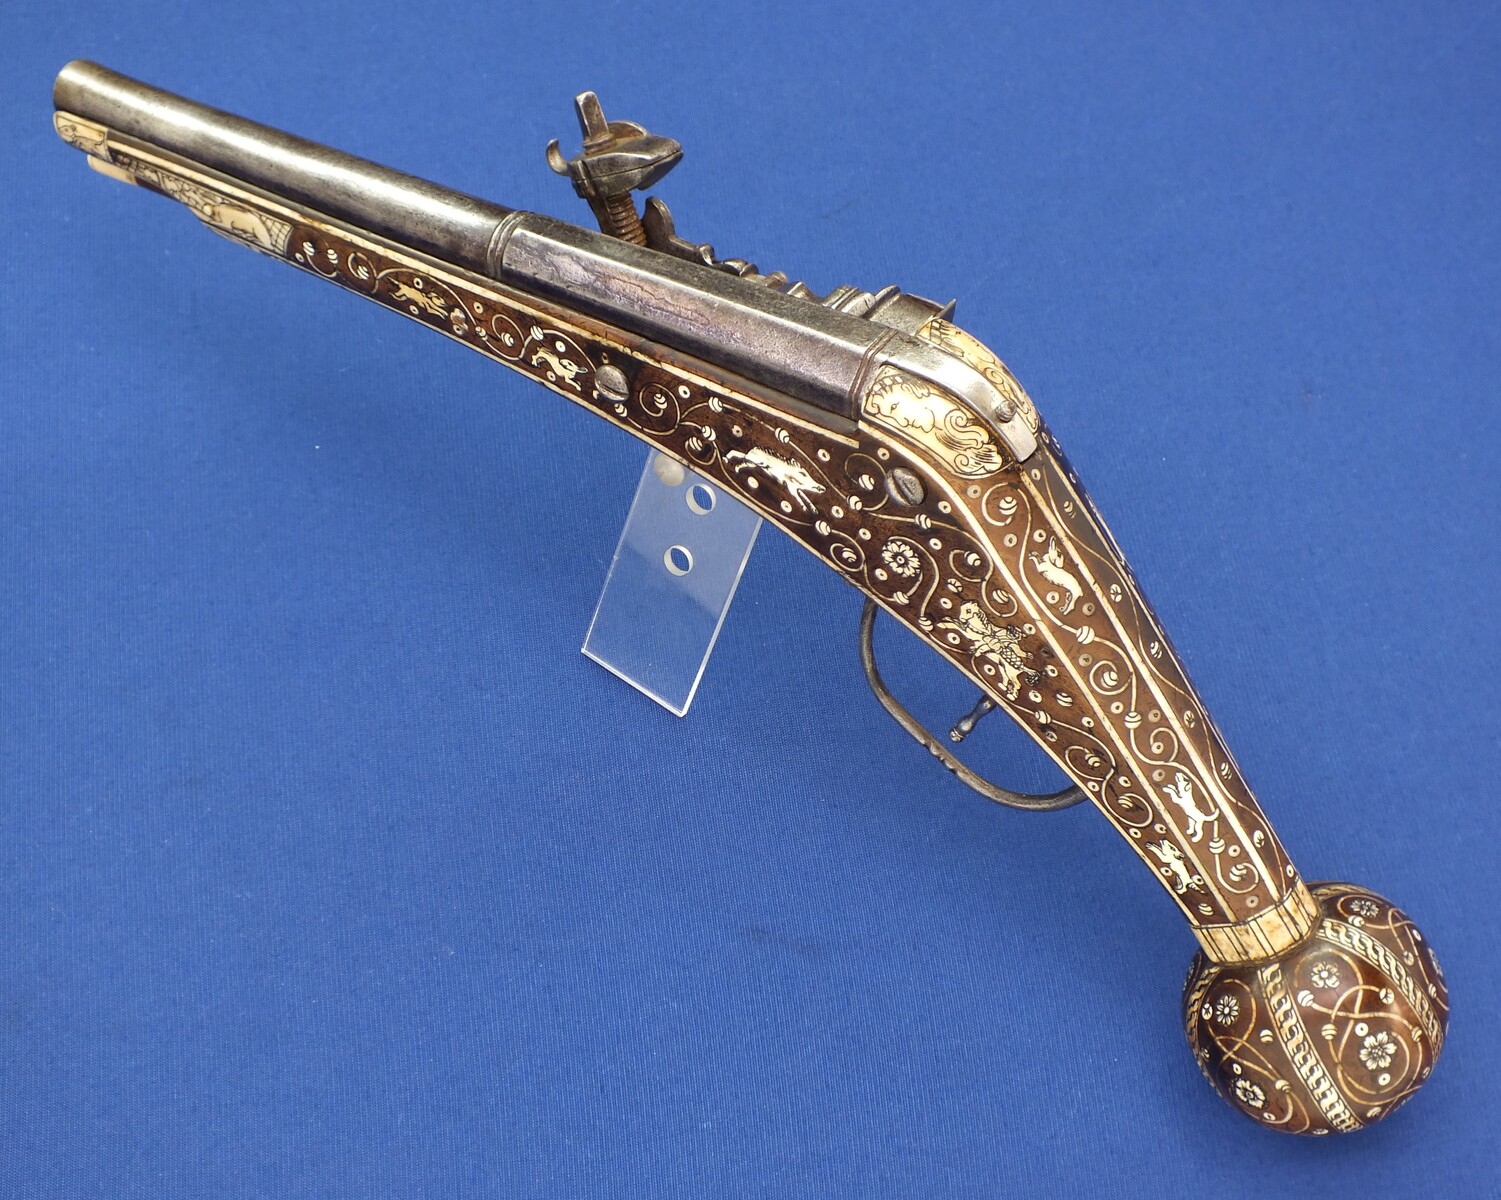 Auktionshaus Geble - ANTIQUE WEAPONS COLLECTION i.a. Radschloss-Puffer  (Germany, Nürnberg, ca. 1600) walnut with ivory inlays . starting price  6.000€ . next auction 111 🔜 12. October 2019 . #fineart #art #instaart #